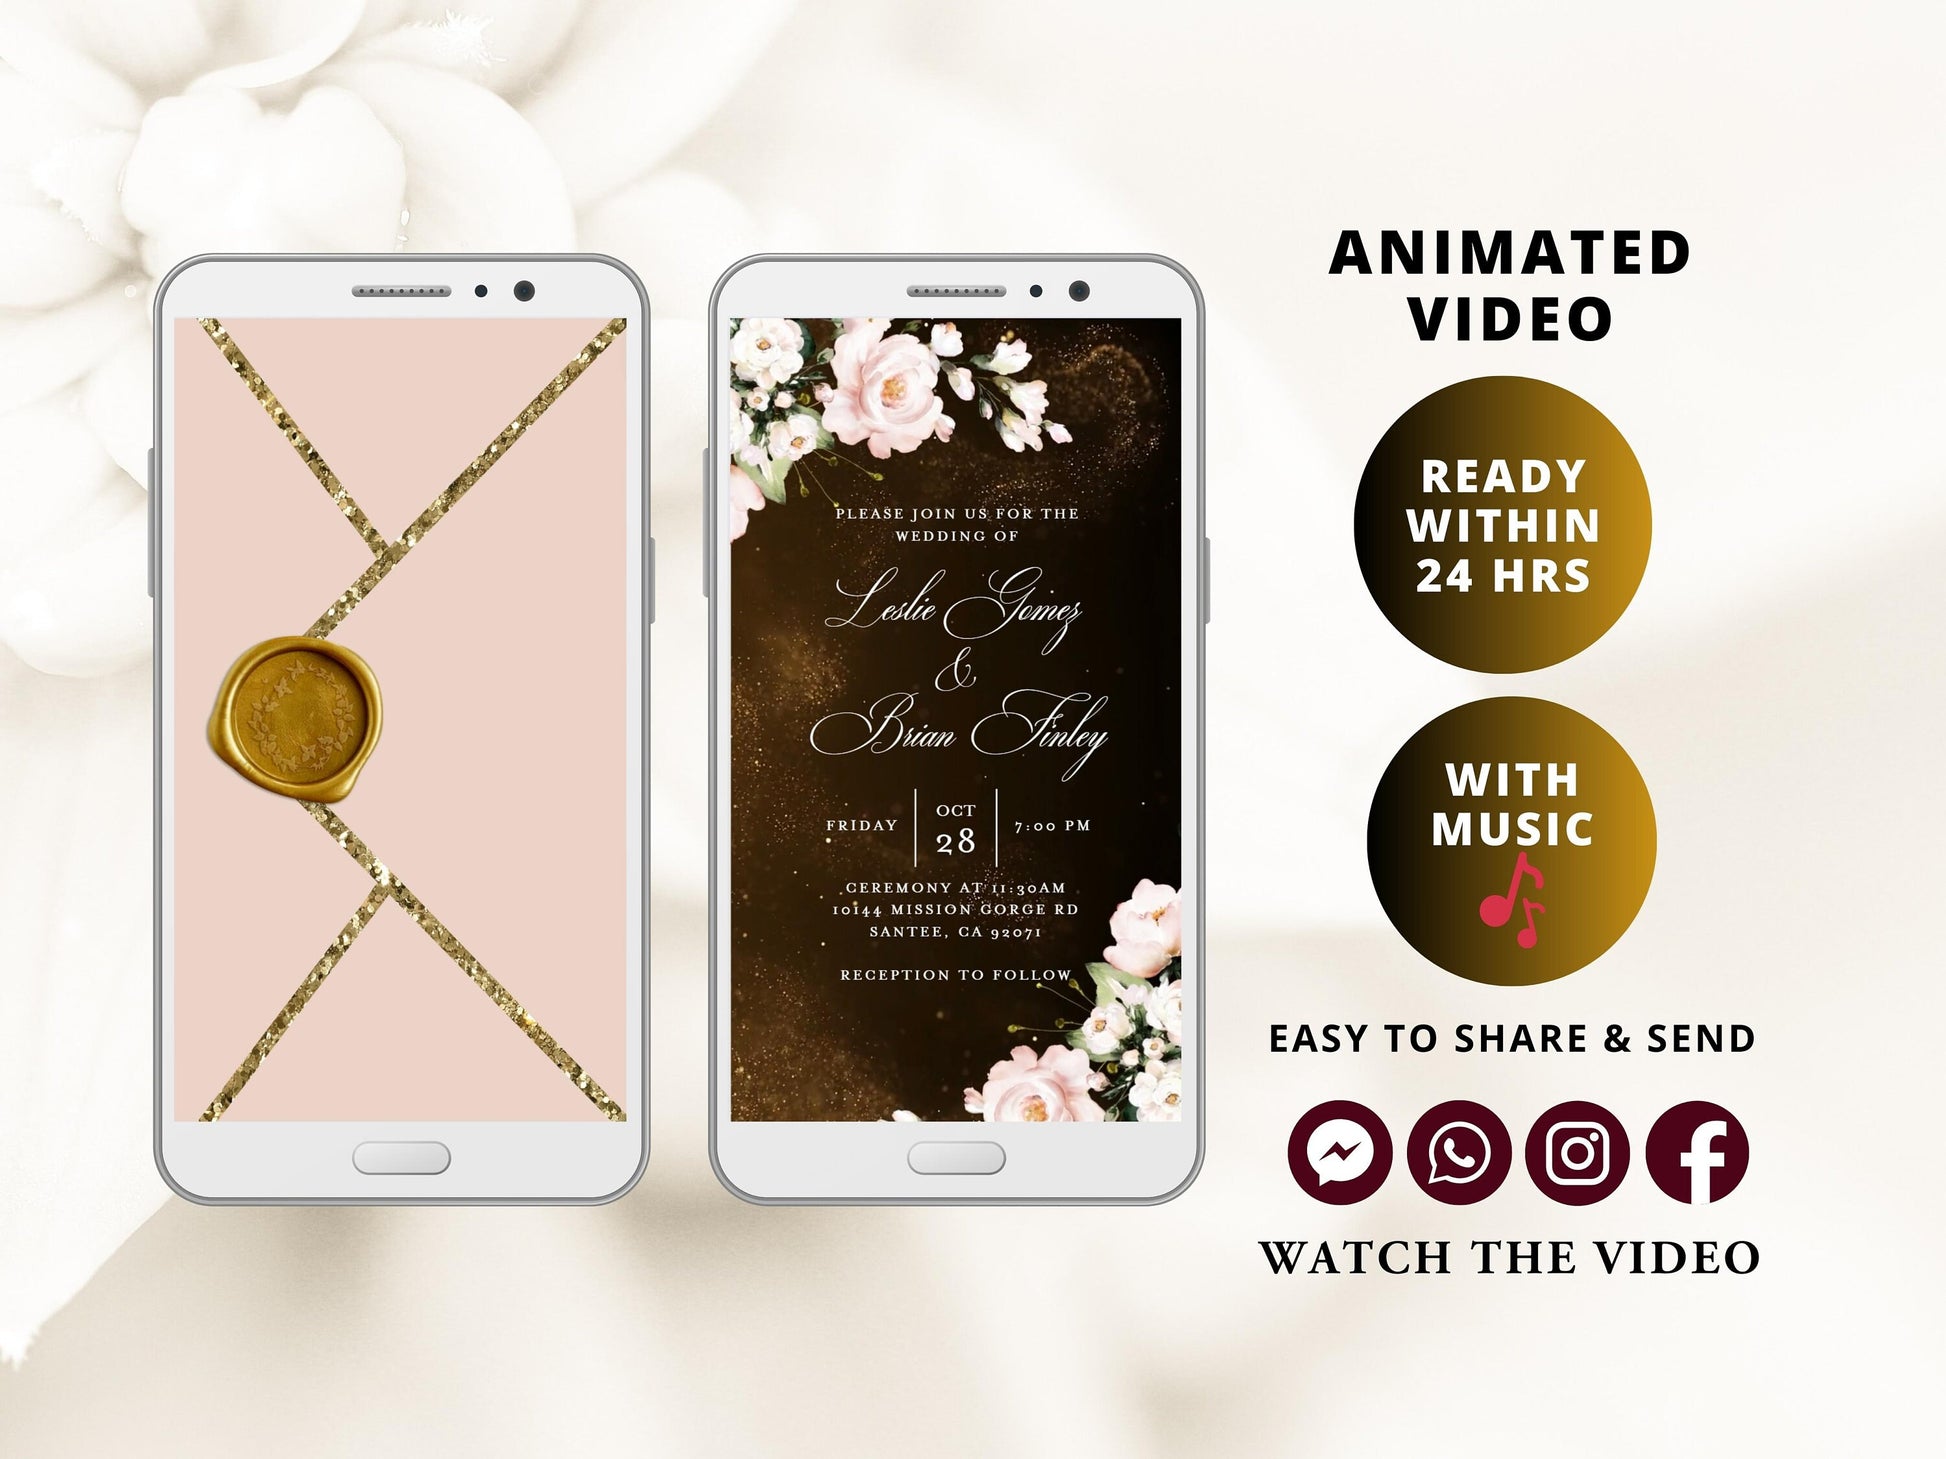 Digital Wedding Invitation with glitter dust and blush flowers, electronic wedding invite with opening pink envelope